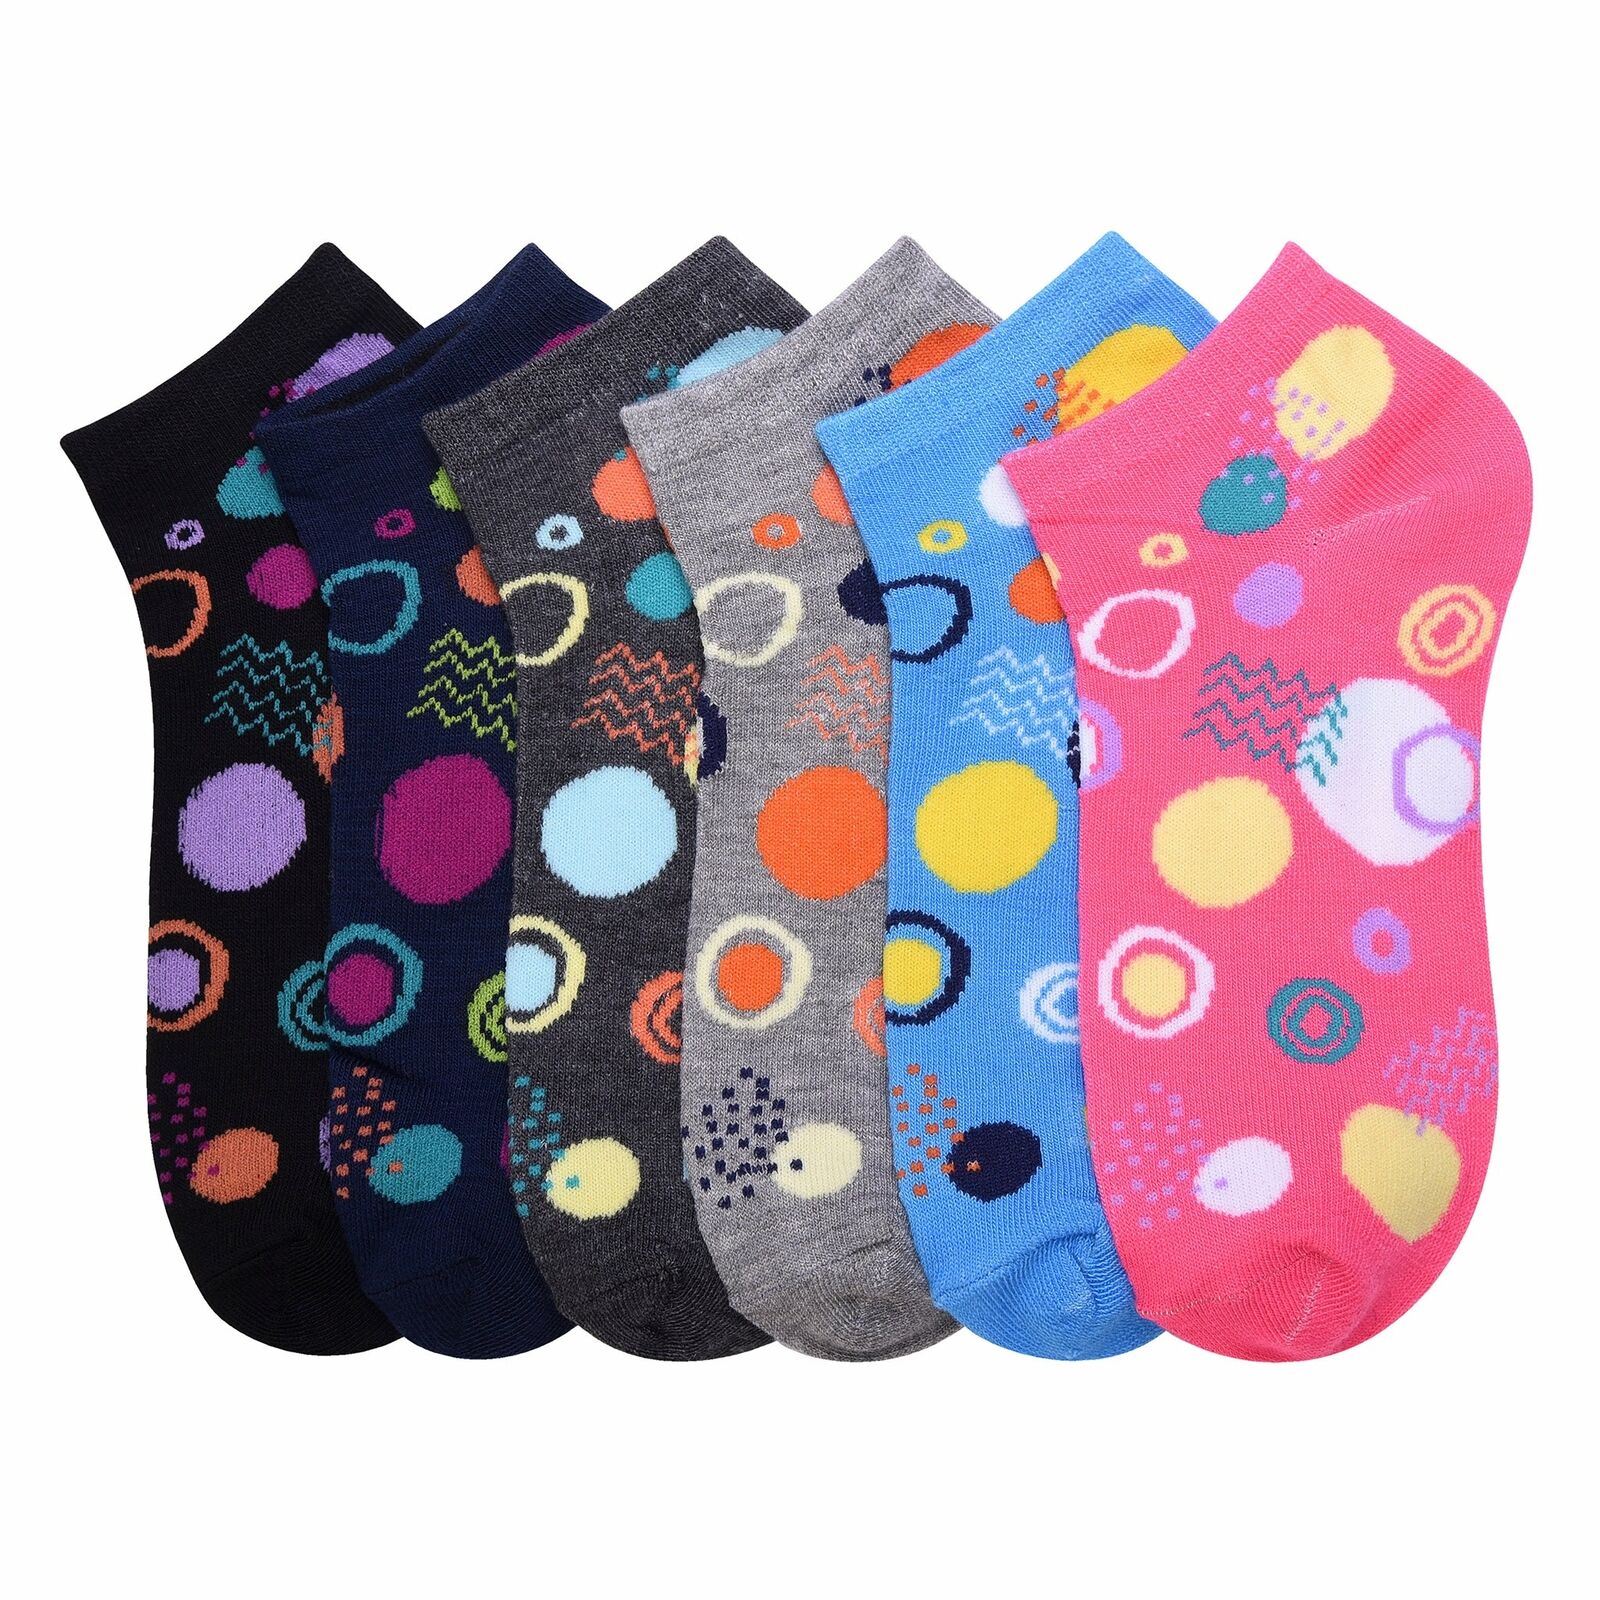 New Mamia Girl's Socks 6-pairs Multi Color Cosmo Pattern Trendy Low Cut 6-8